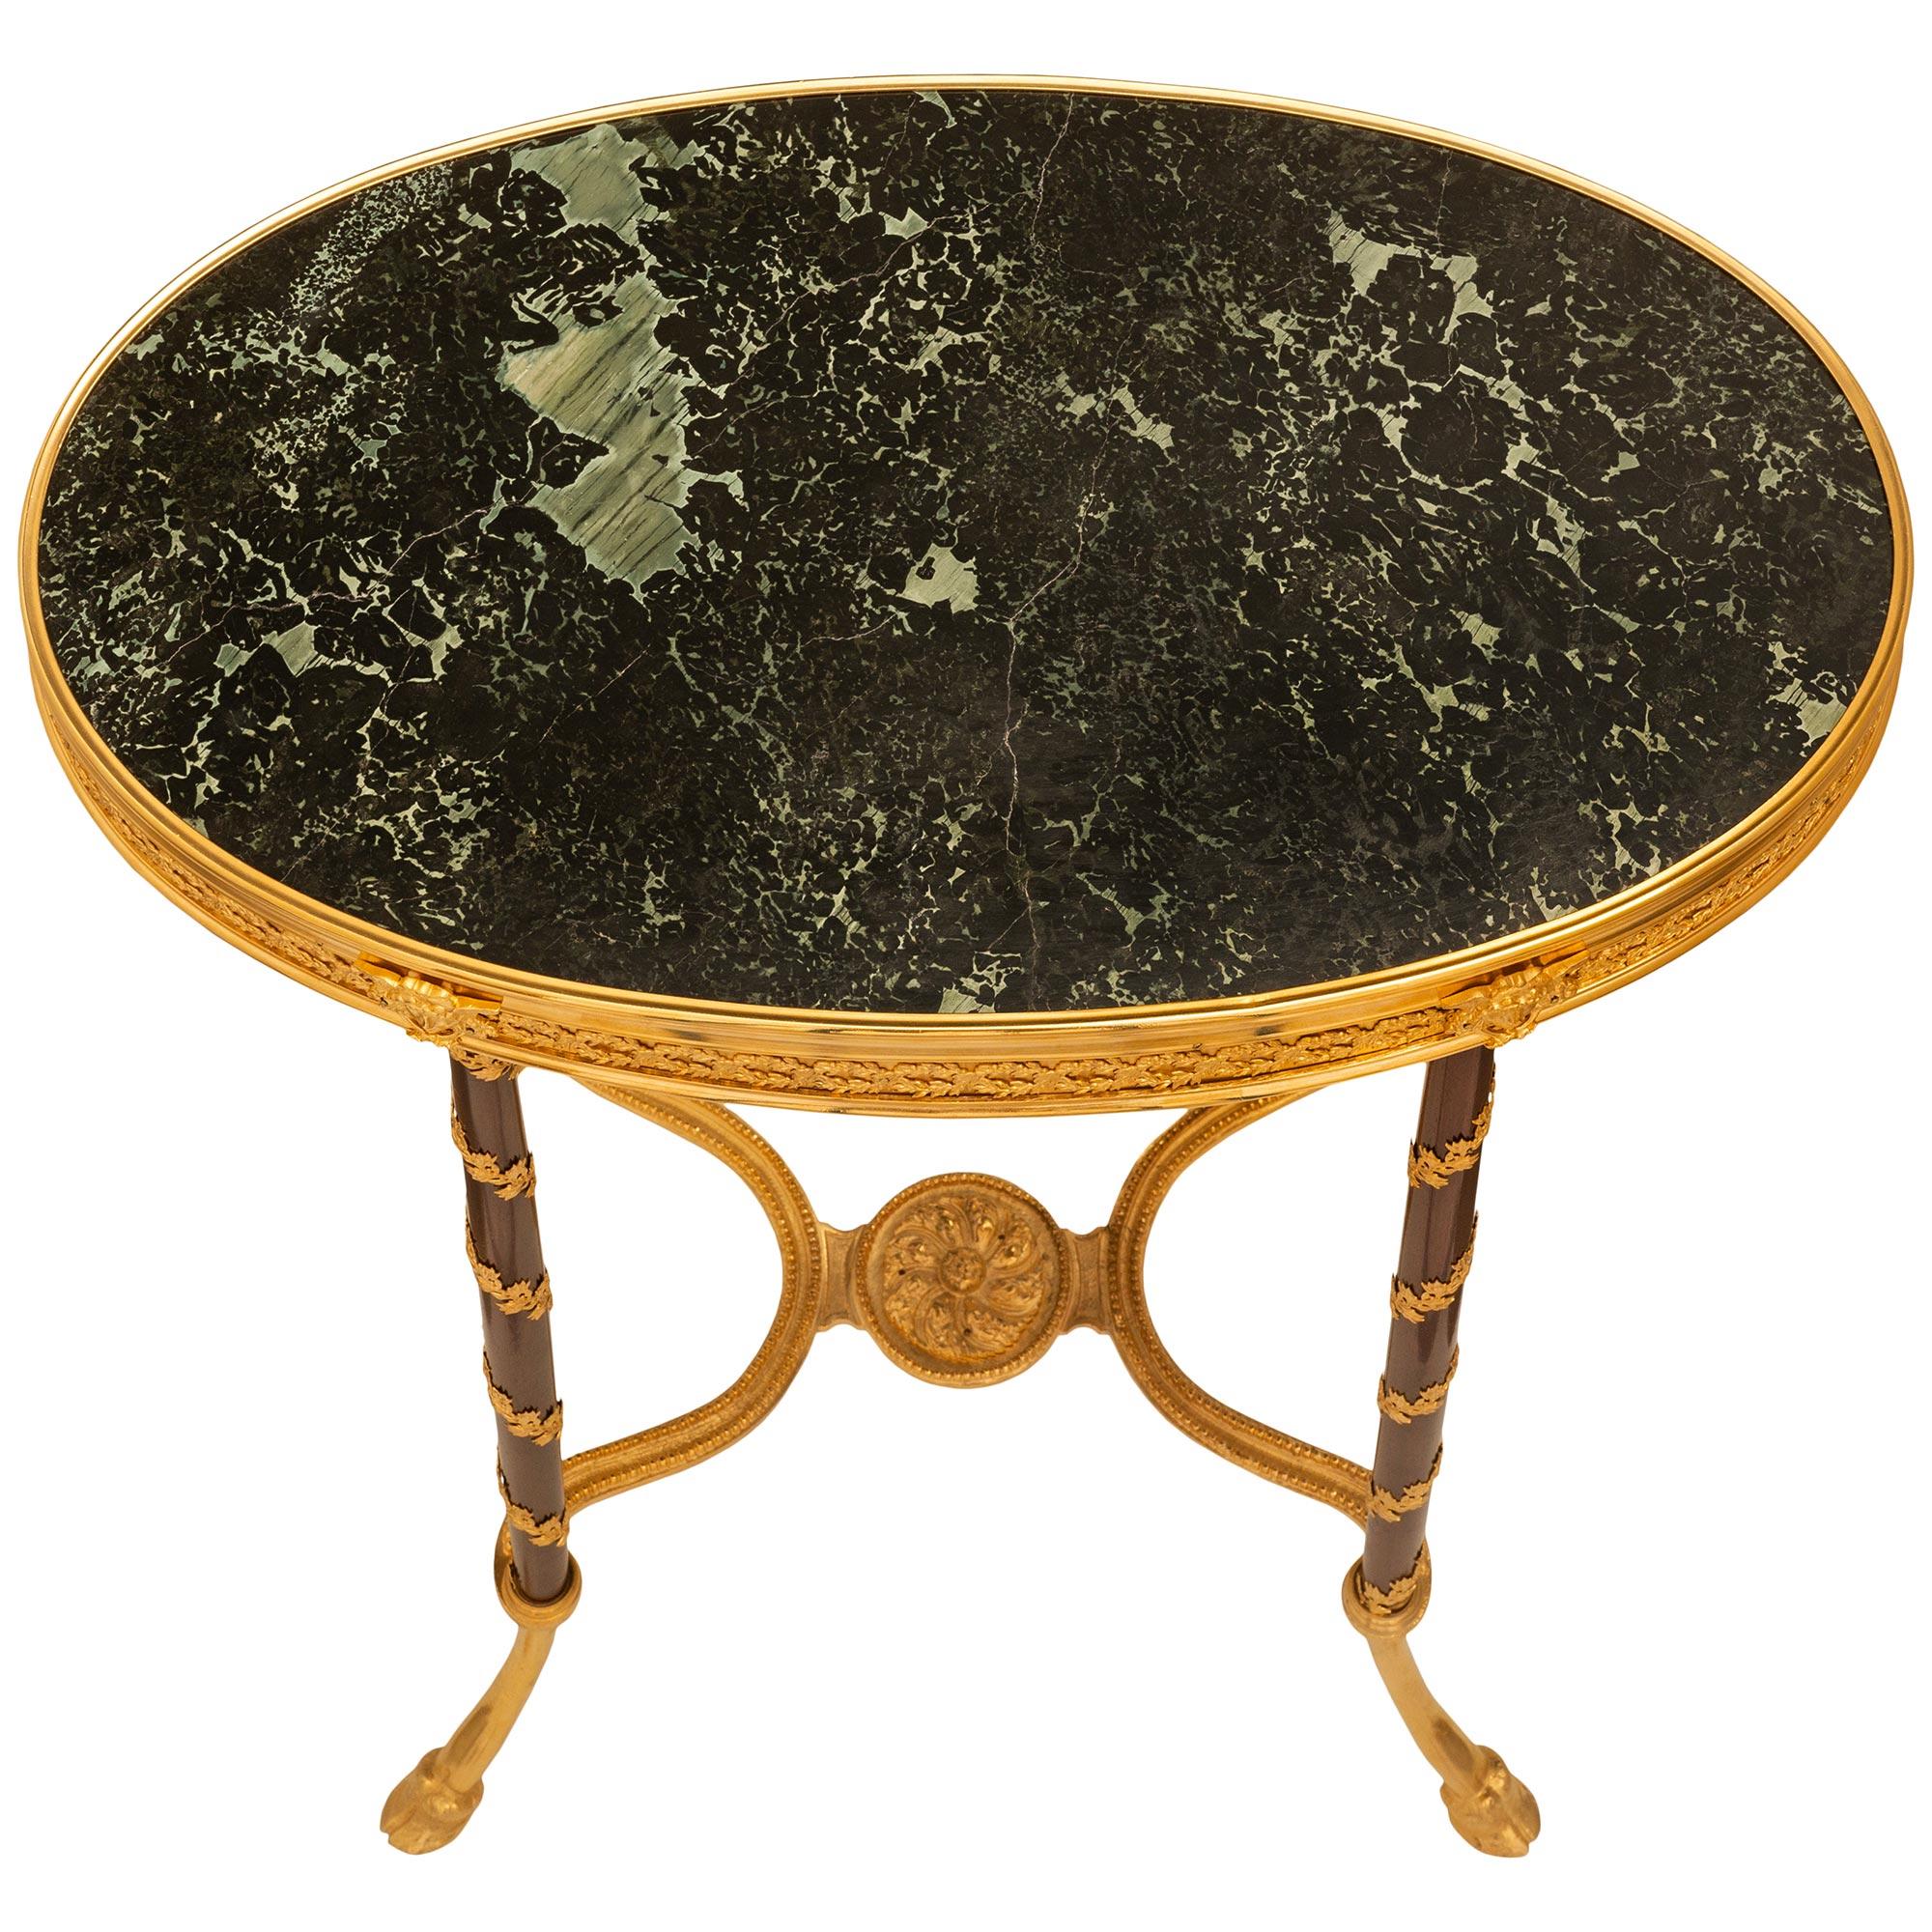 A very elegant French 19th century Louis XVI st. Ormolu, Mahogany and marble table. The oval side table is raised on four 'C' scrolled Ormolu legs ending with hoof feet. The four legs are joined by an 'X' stretcher with beaded edges and a central